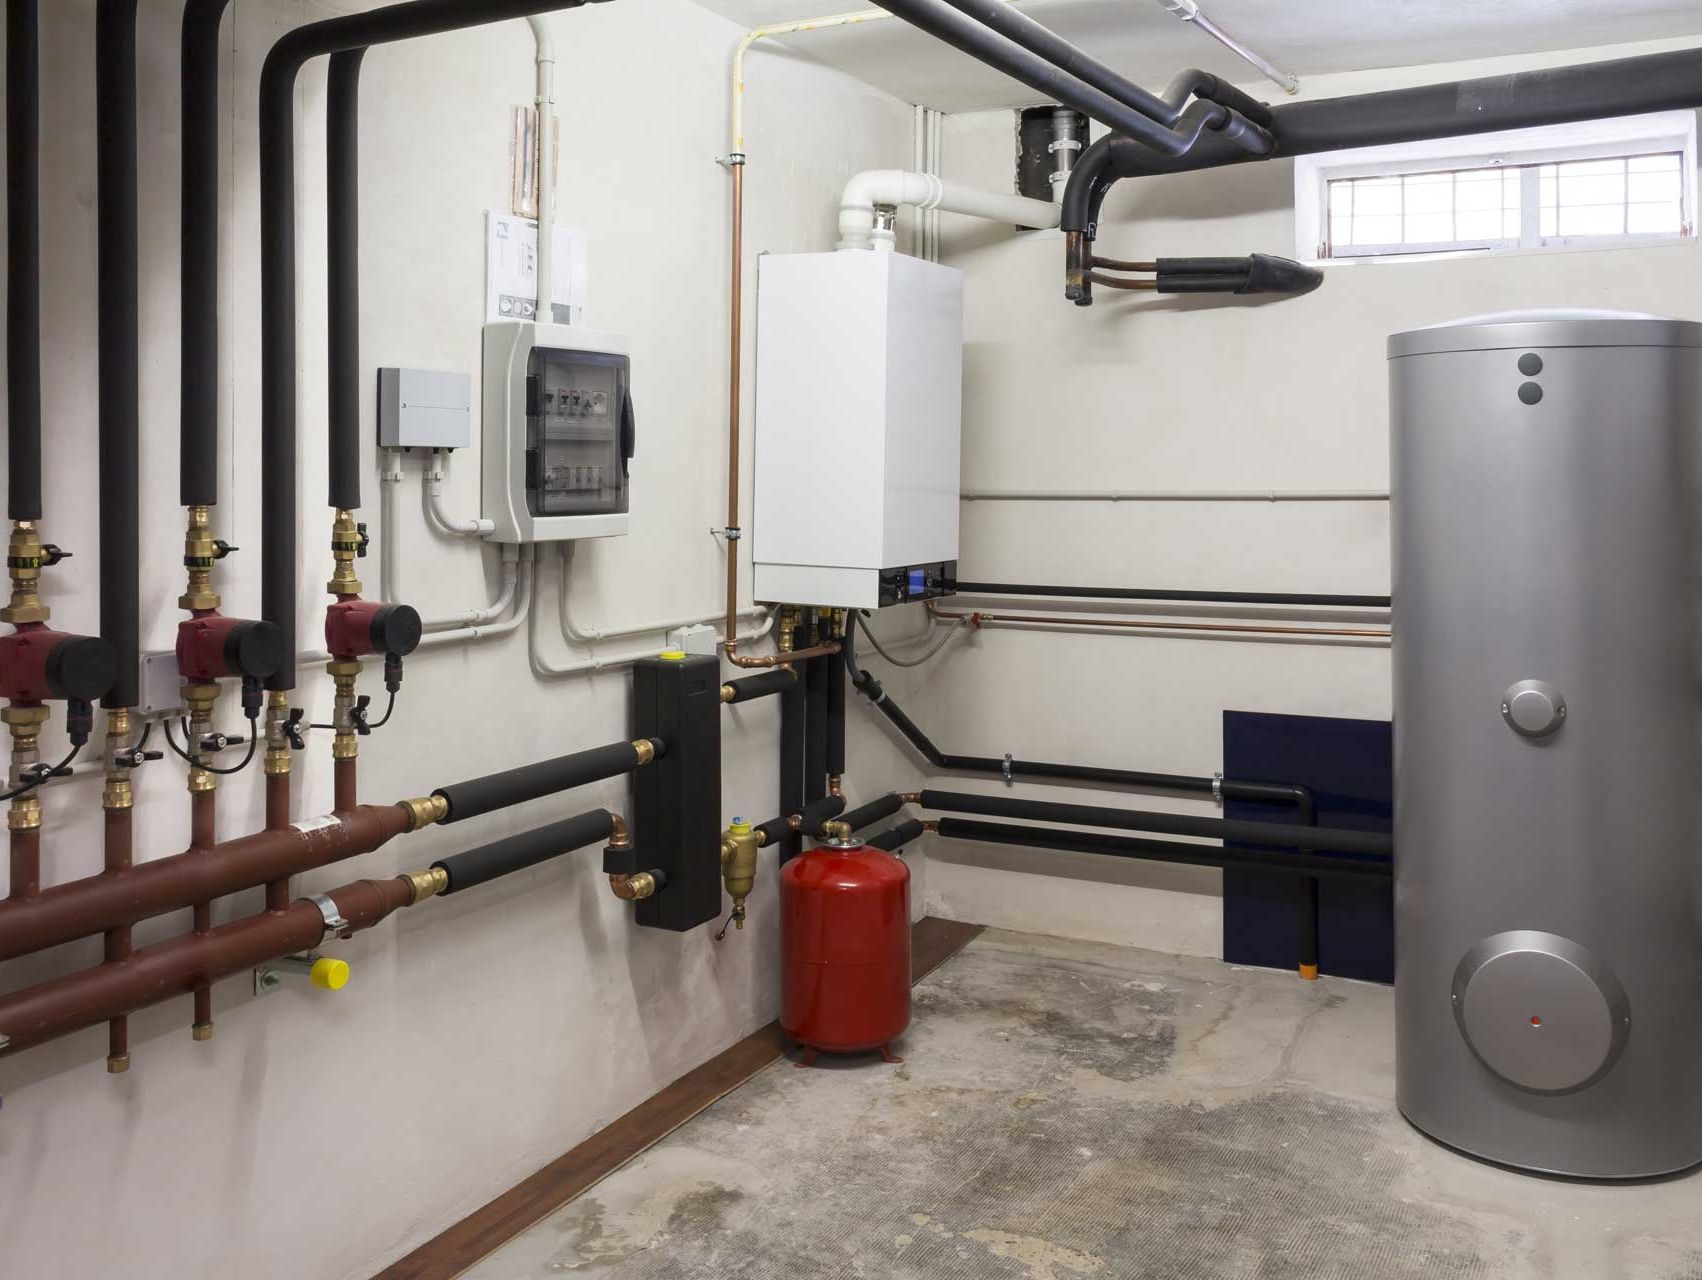 Home Heating Systems in a boiler room